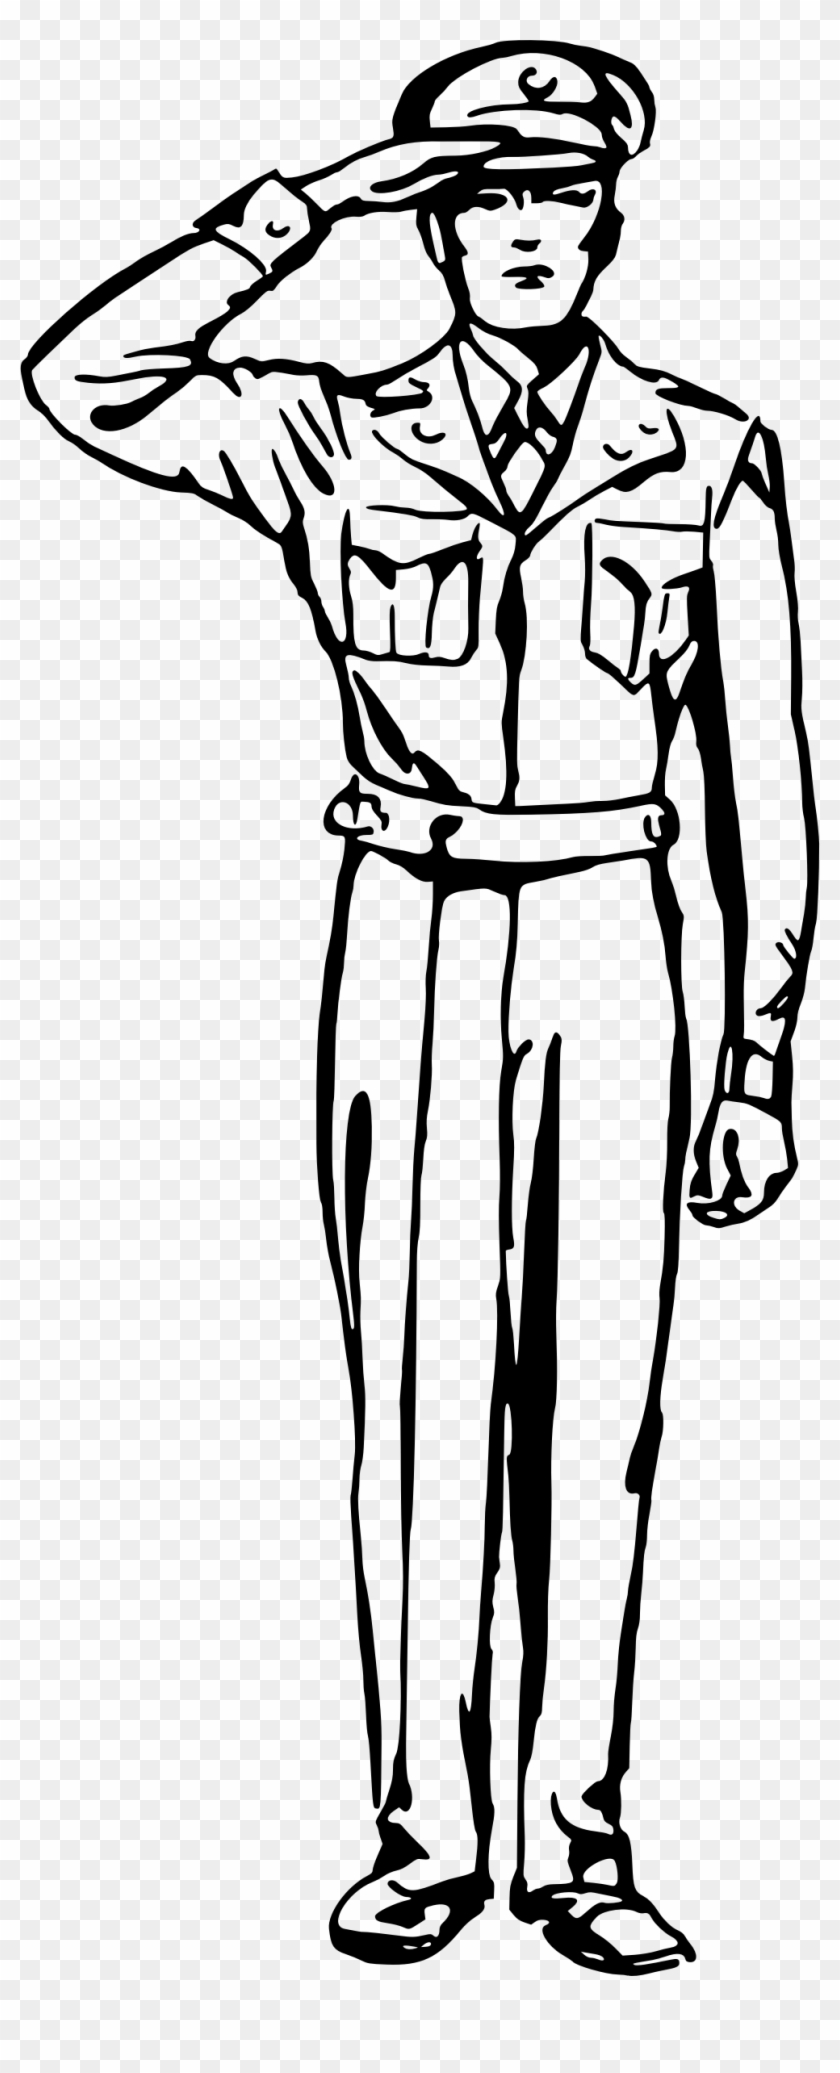 Big Image - Drawing Of A Soldier Saluting #663806